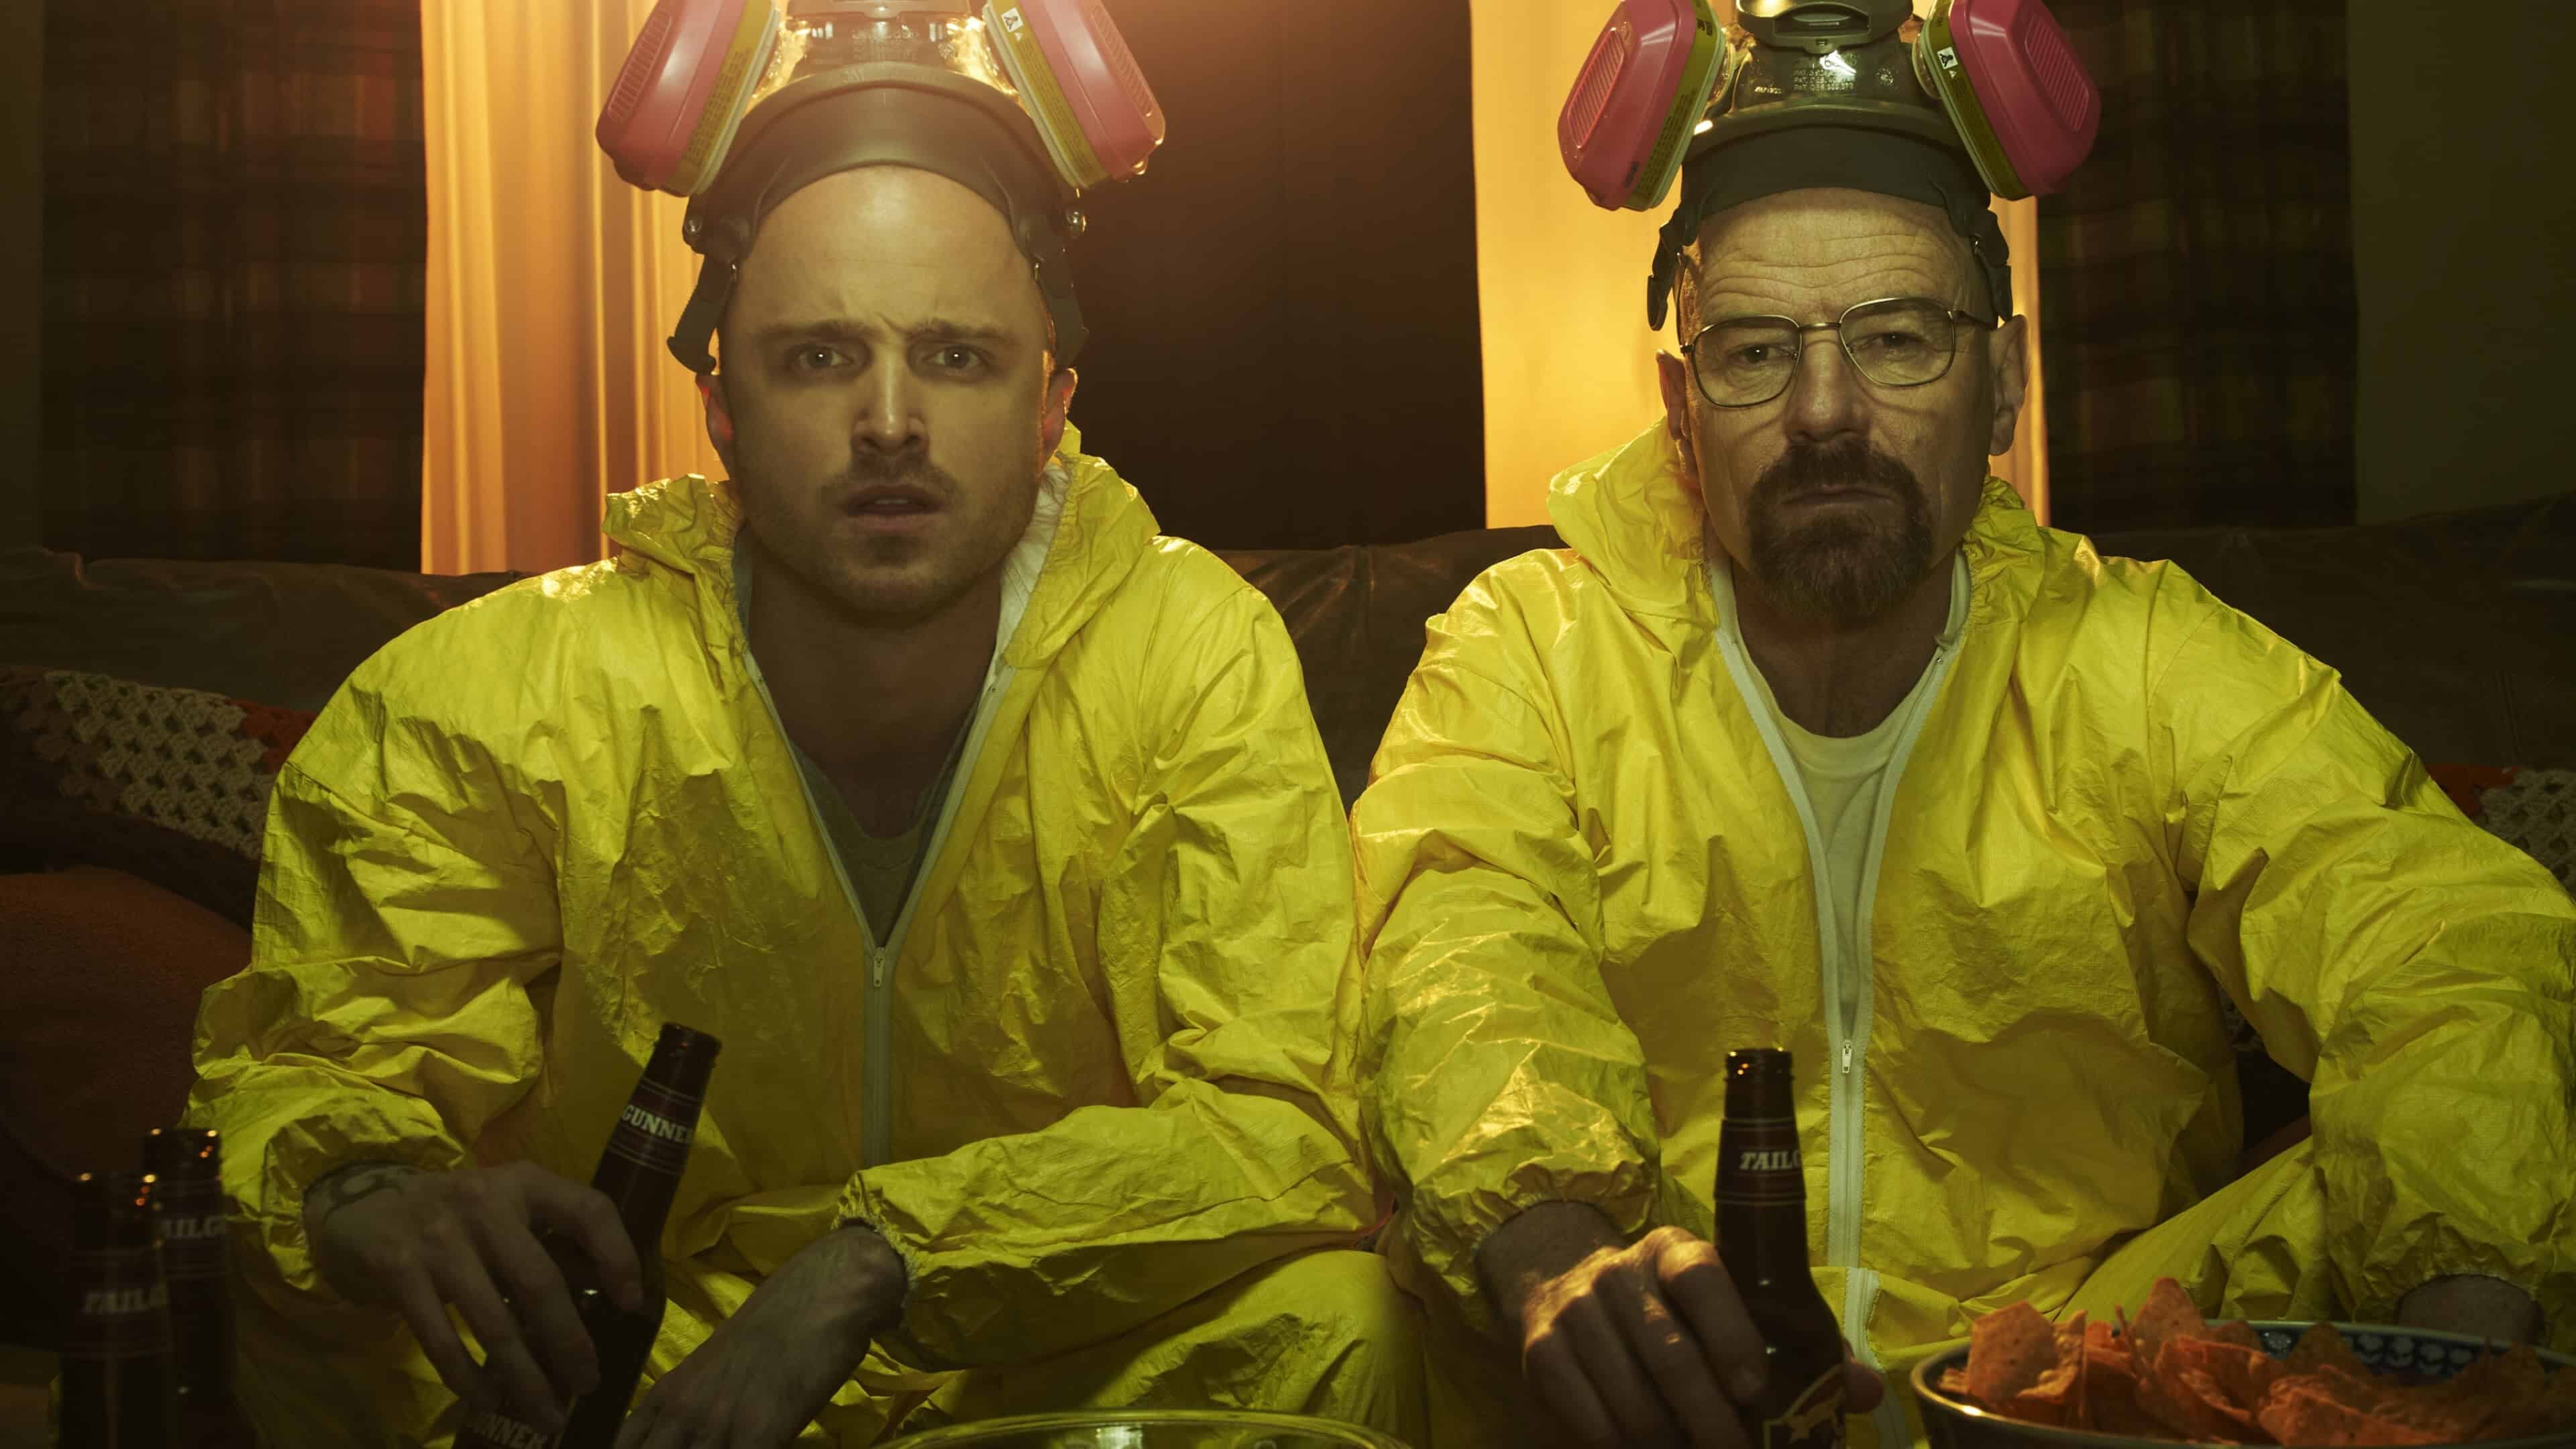 Breaking Bad: White, Jesse Pinkman, Walter's cooking partner and former student. 3840x2160 4K Wallpaper.